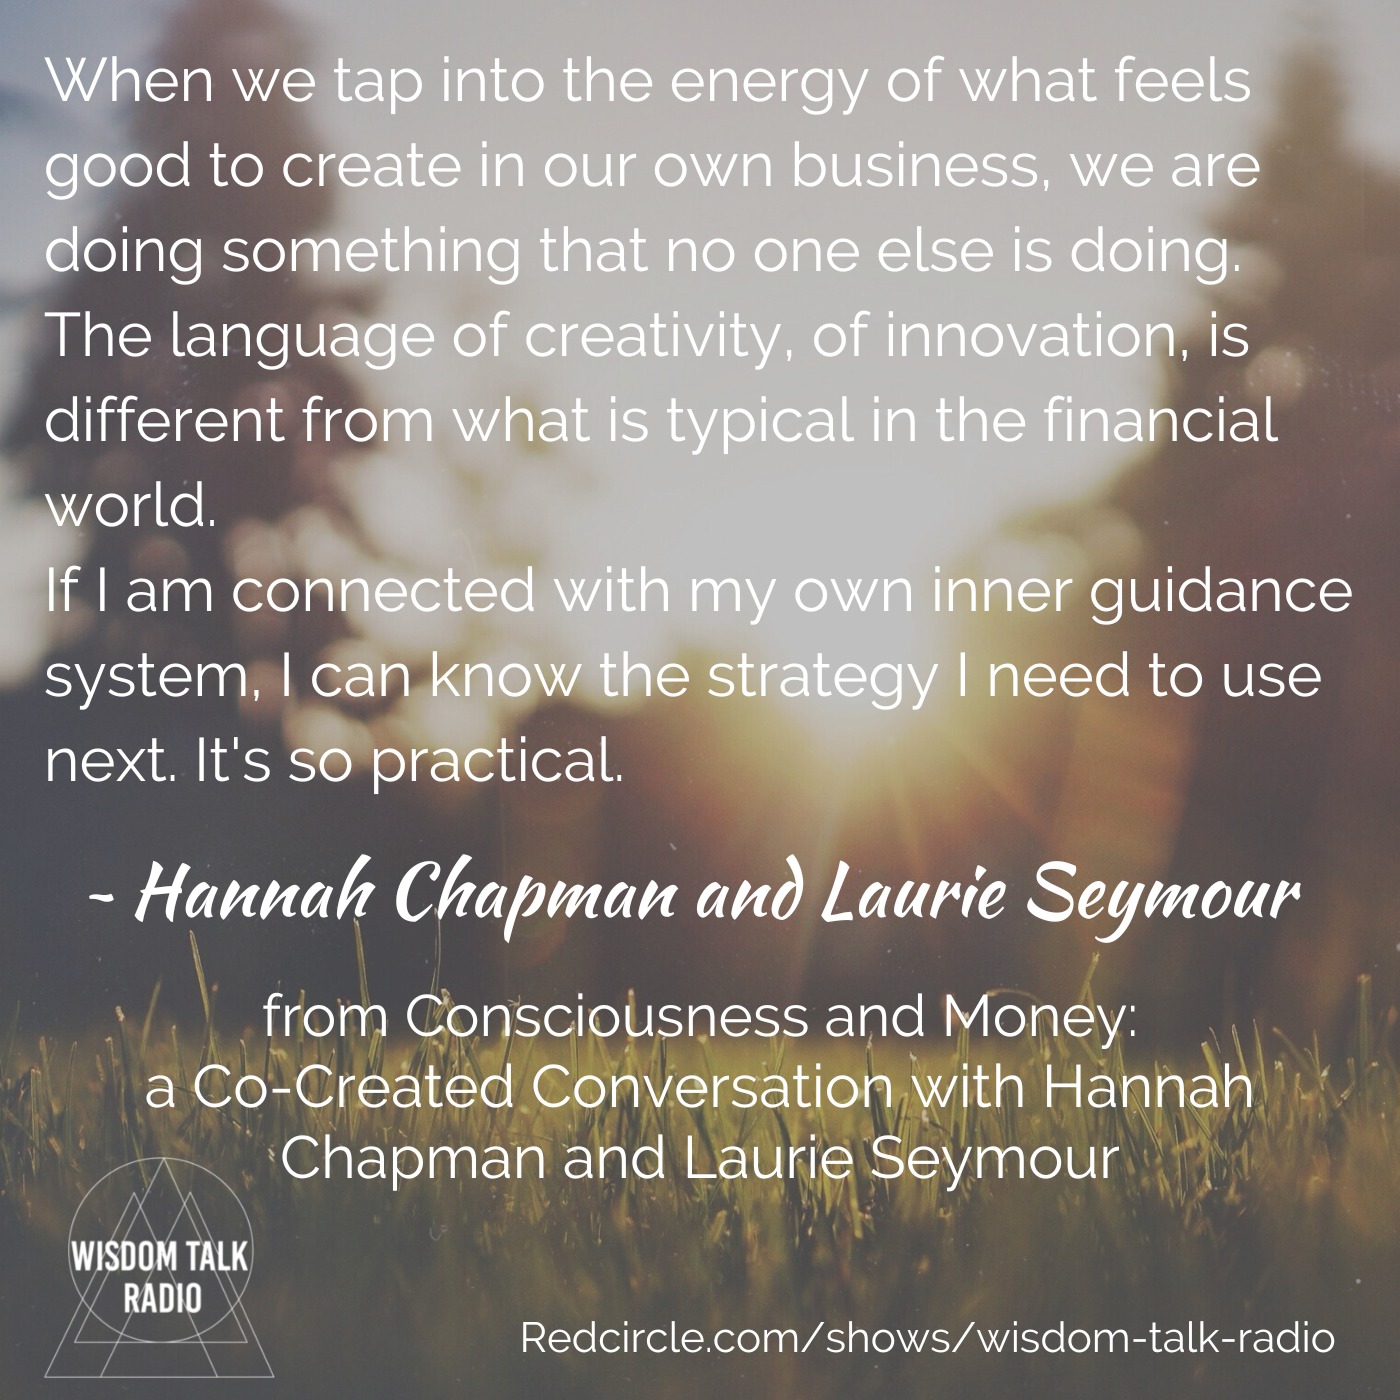 Consciousness and Money: a co-created Conversation with Hannah Chapman and Laurie Seymour